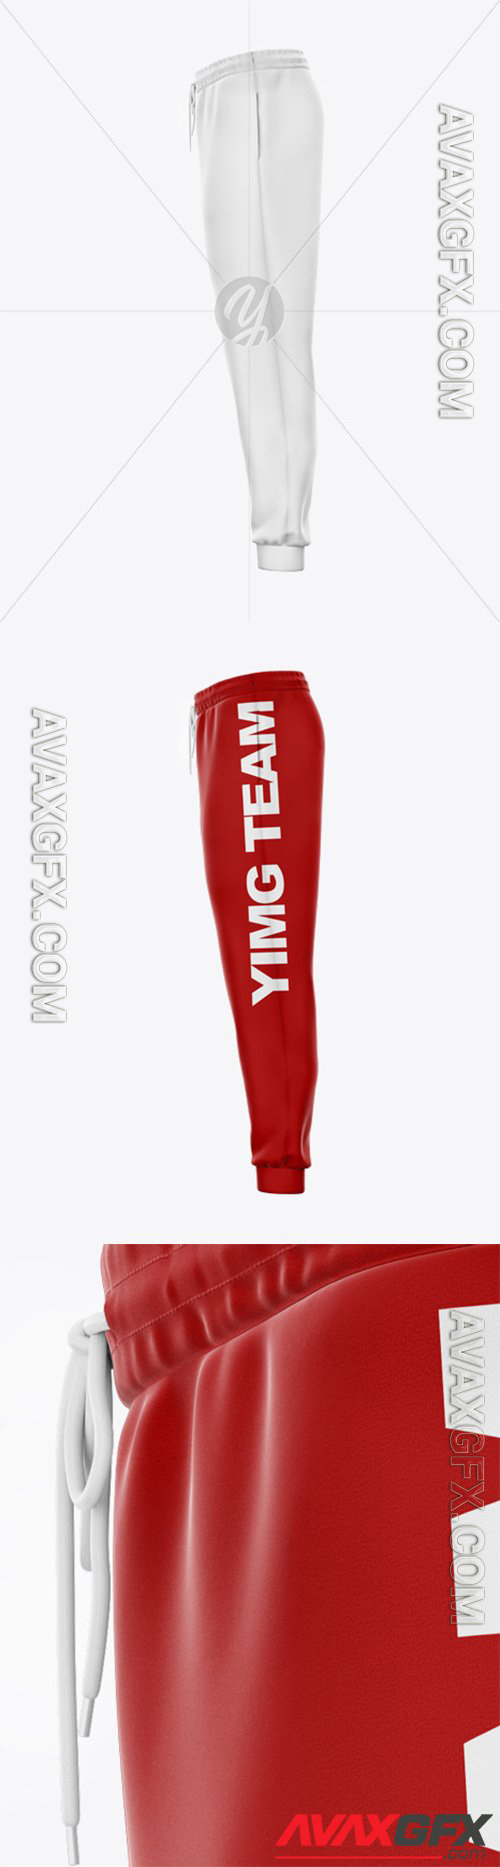 Sweatpants with Cord Mockup - Left Side View 56753